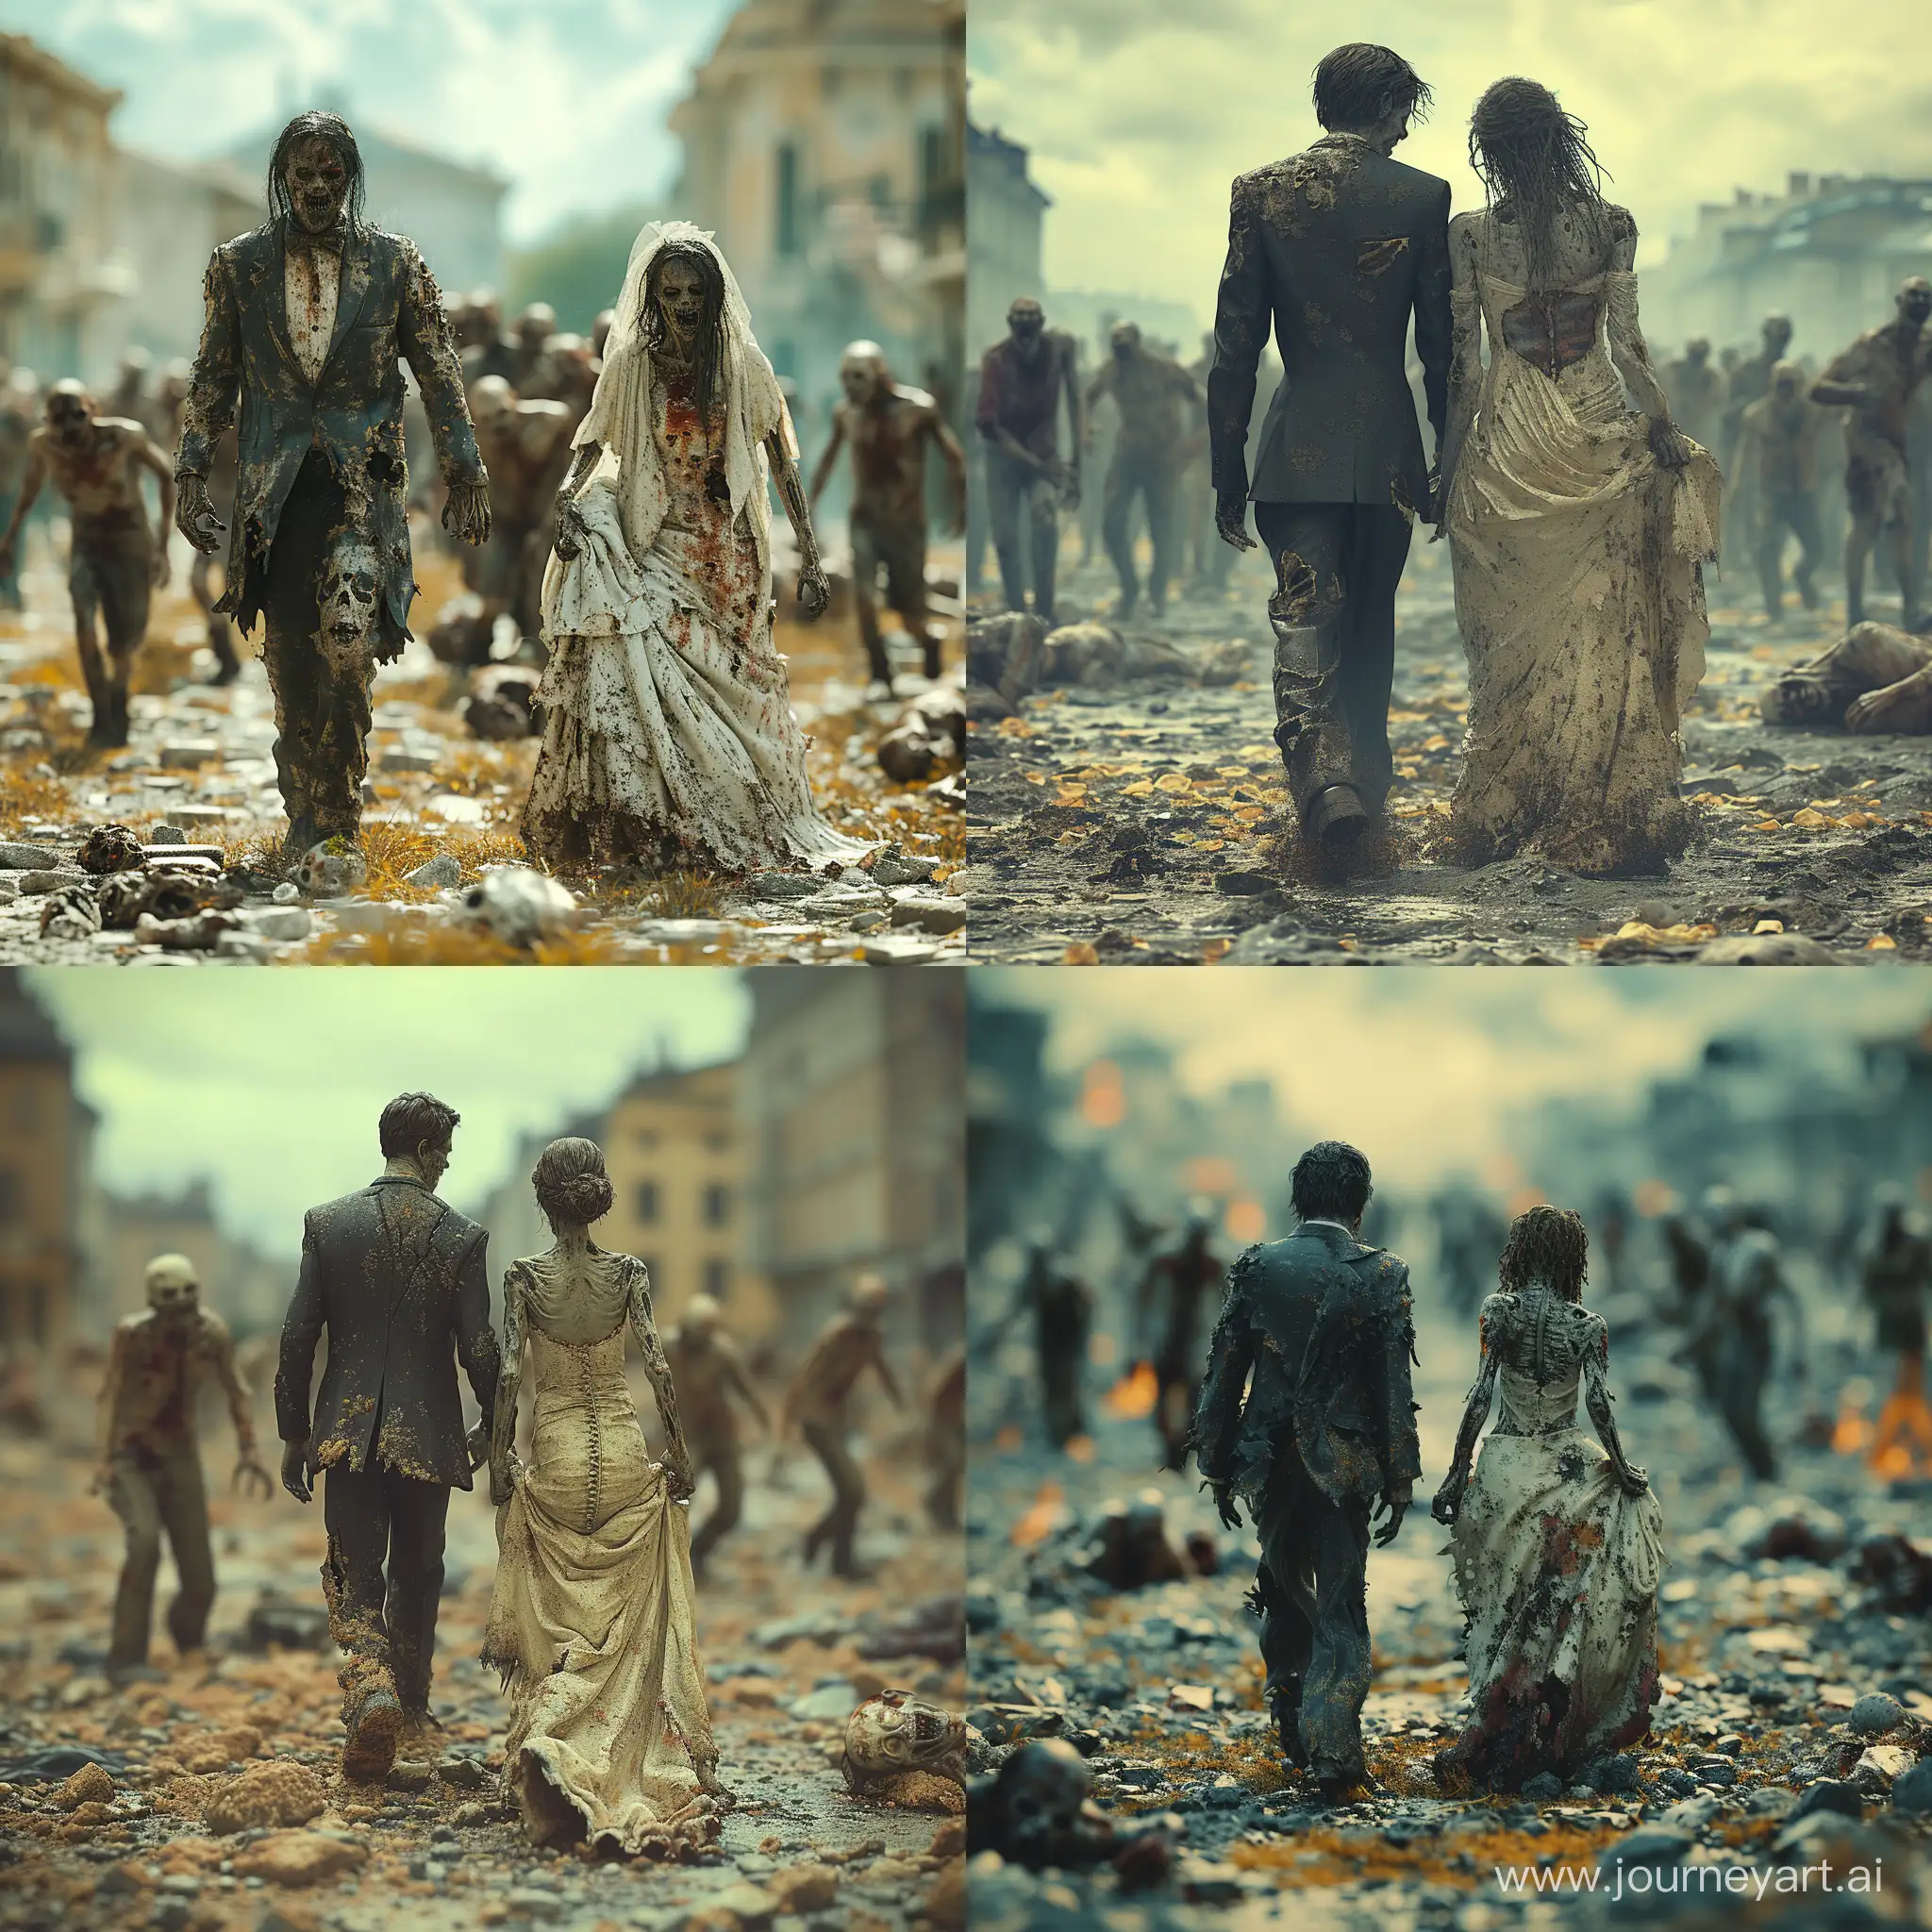 Zombie-Wedding-in-Chaotic-Old-Town-Detailed-Realistic-Stylized-Image